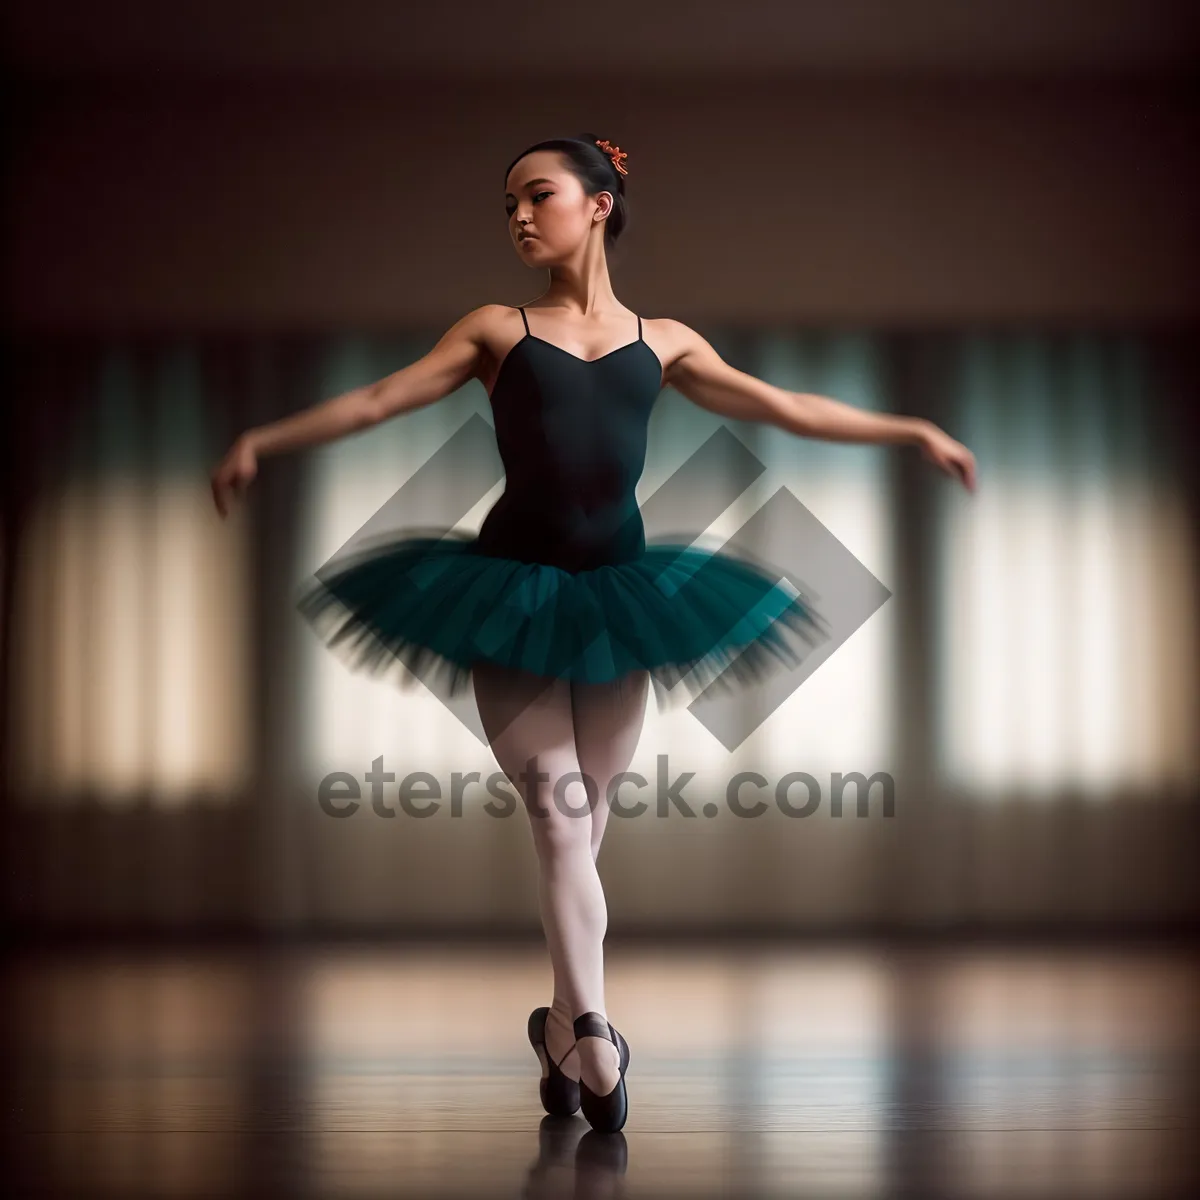 Picture of Graceful Ballerina Strikes Elegance and Athleticism Pose